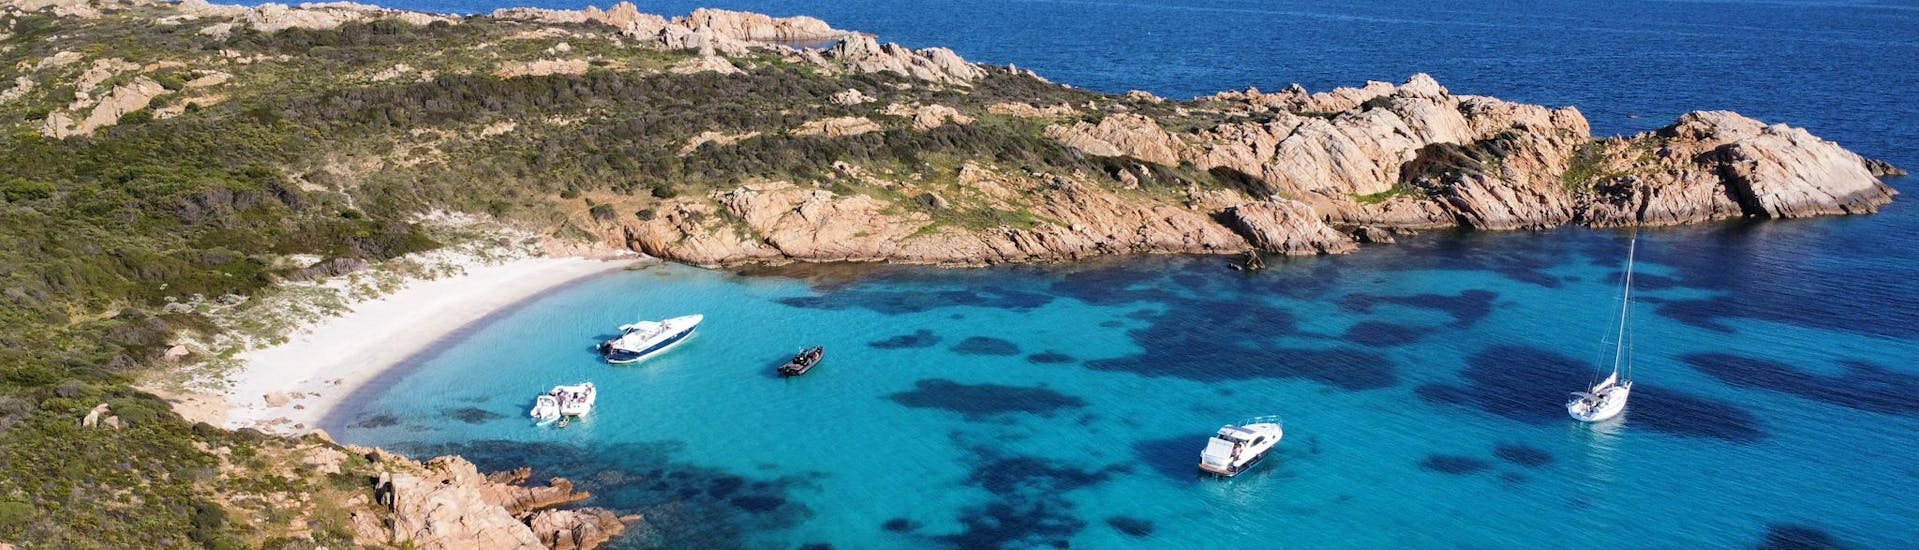 View of a turquoise cove that you can visit during the RIB Boat Rental in Porto Rotondo (up to 10 people) with Licence with Dream Rental Boat.